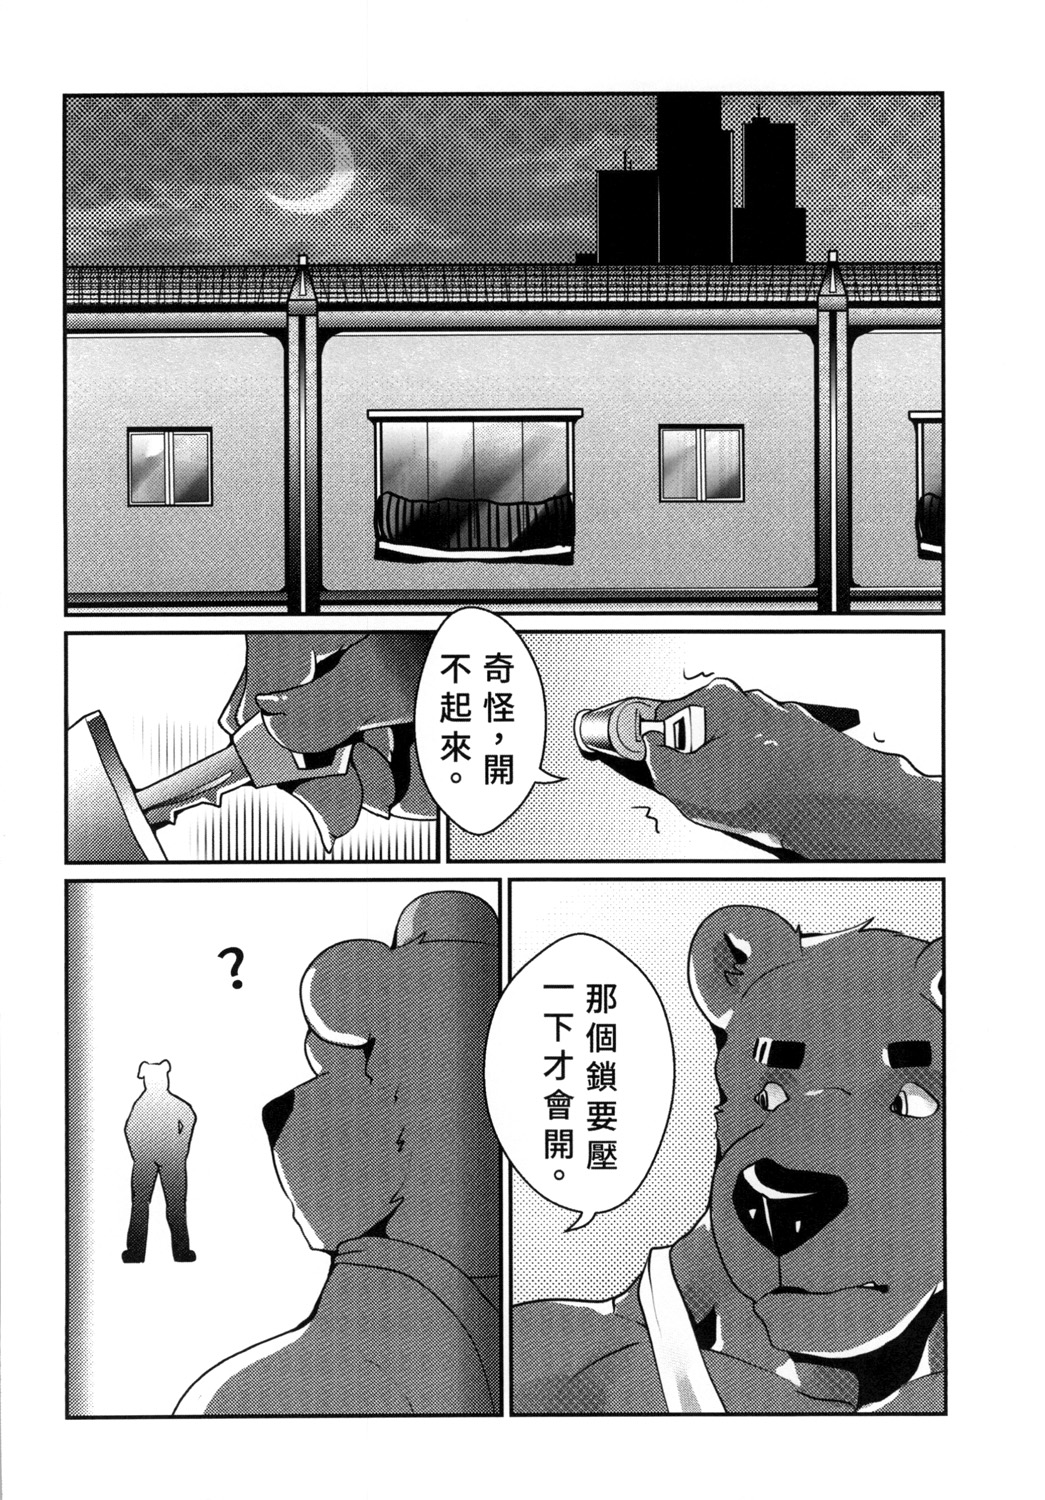 [Steely A (AfterDer)] 熊汁Bear Juice [Chinese] [Digital] [Steely A (AfterDer)] 熊汁Bear Juice [中国語] [DL版]